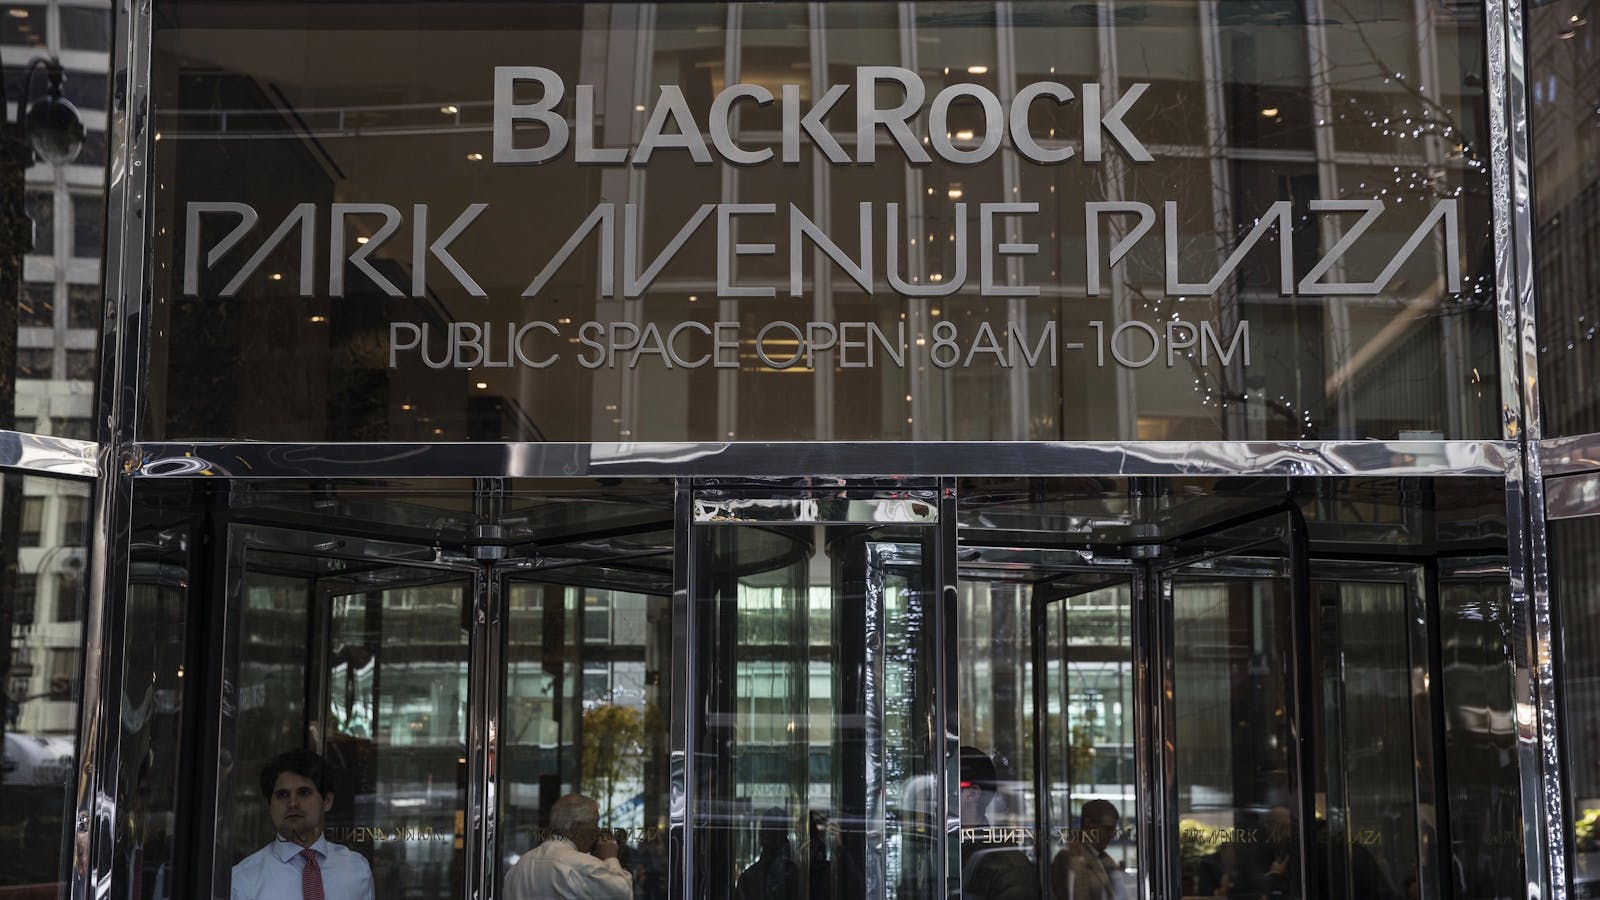 BlackRock's headquarters in New York. Photo by Bloomberg.